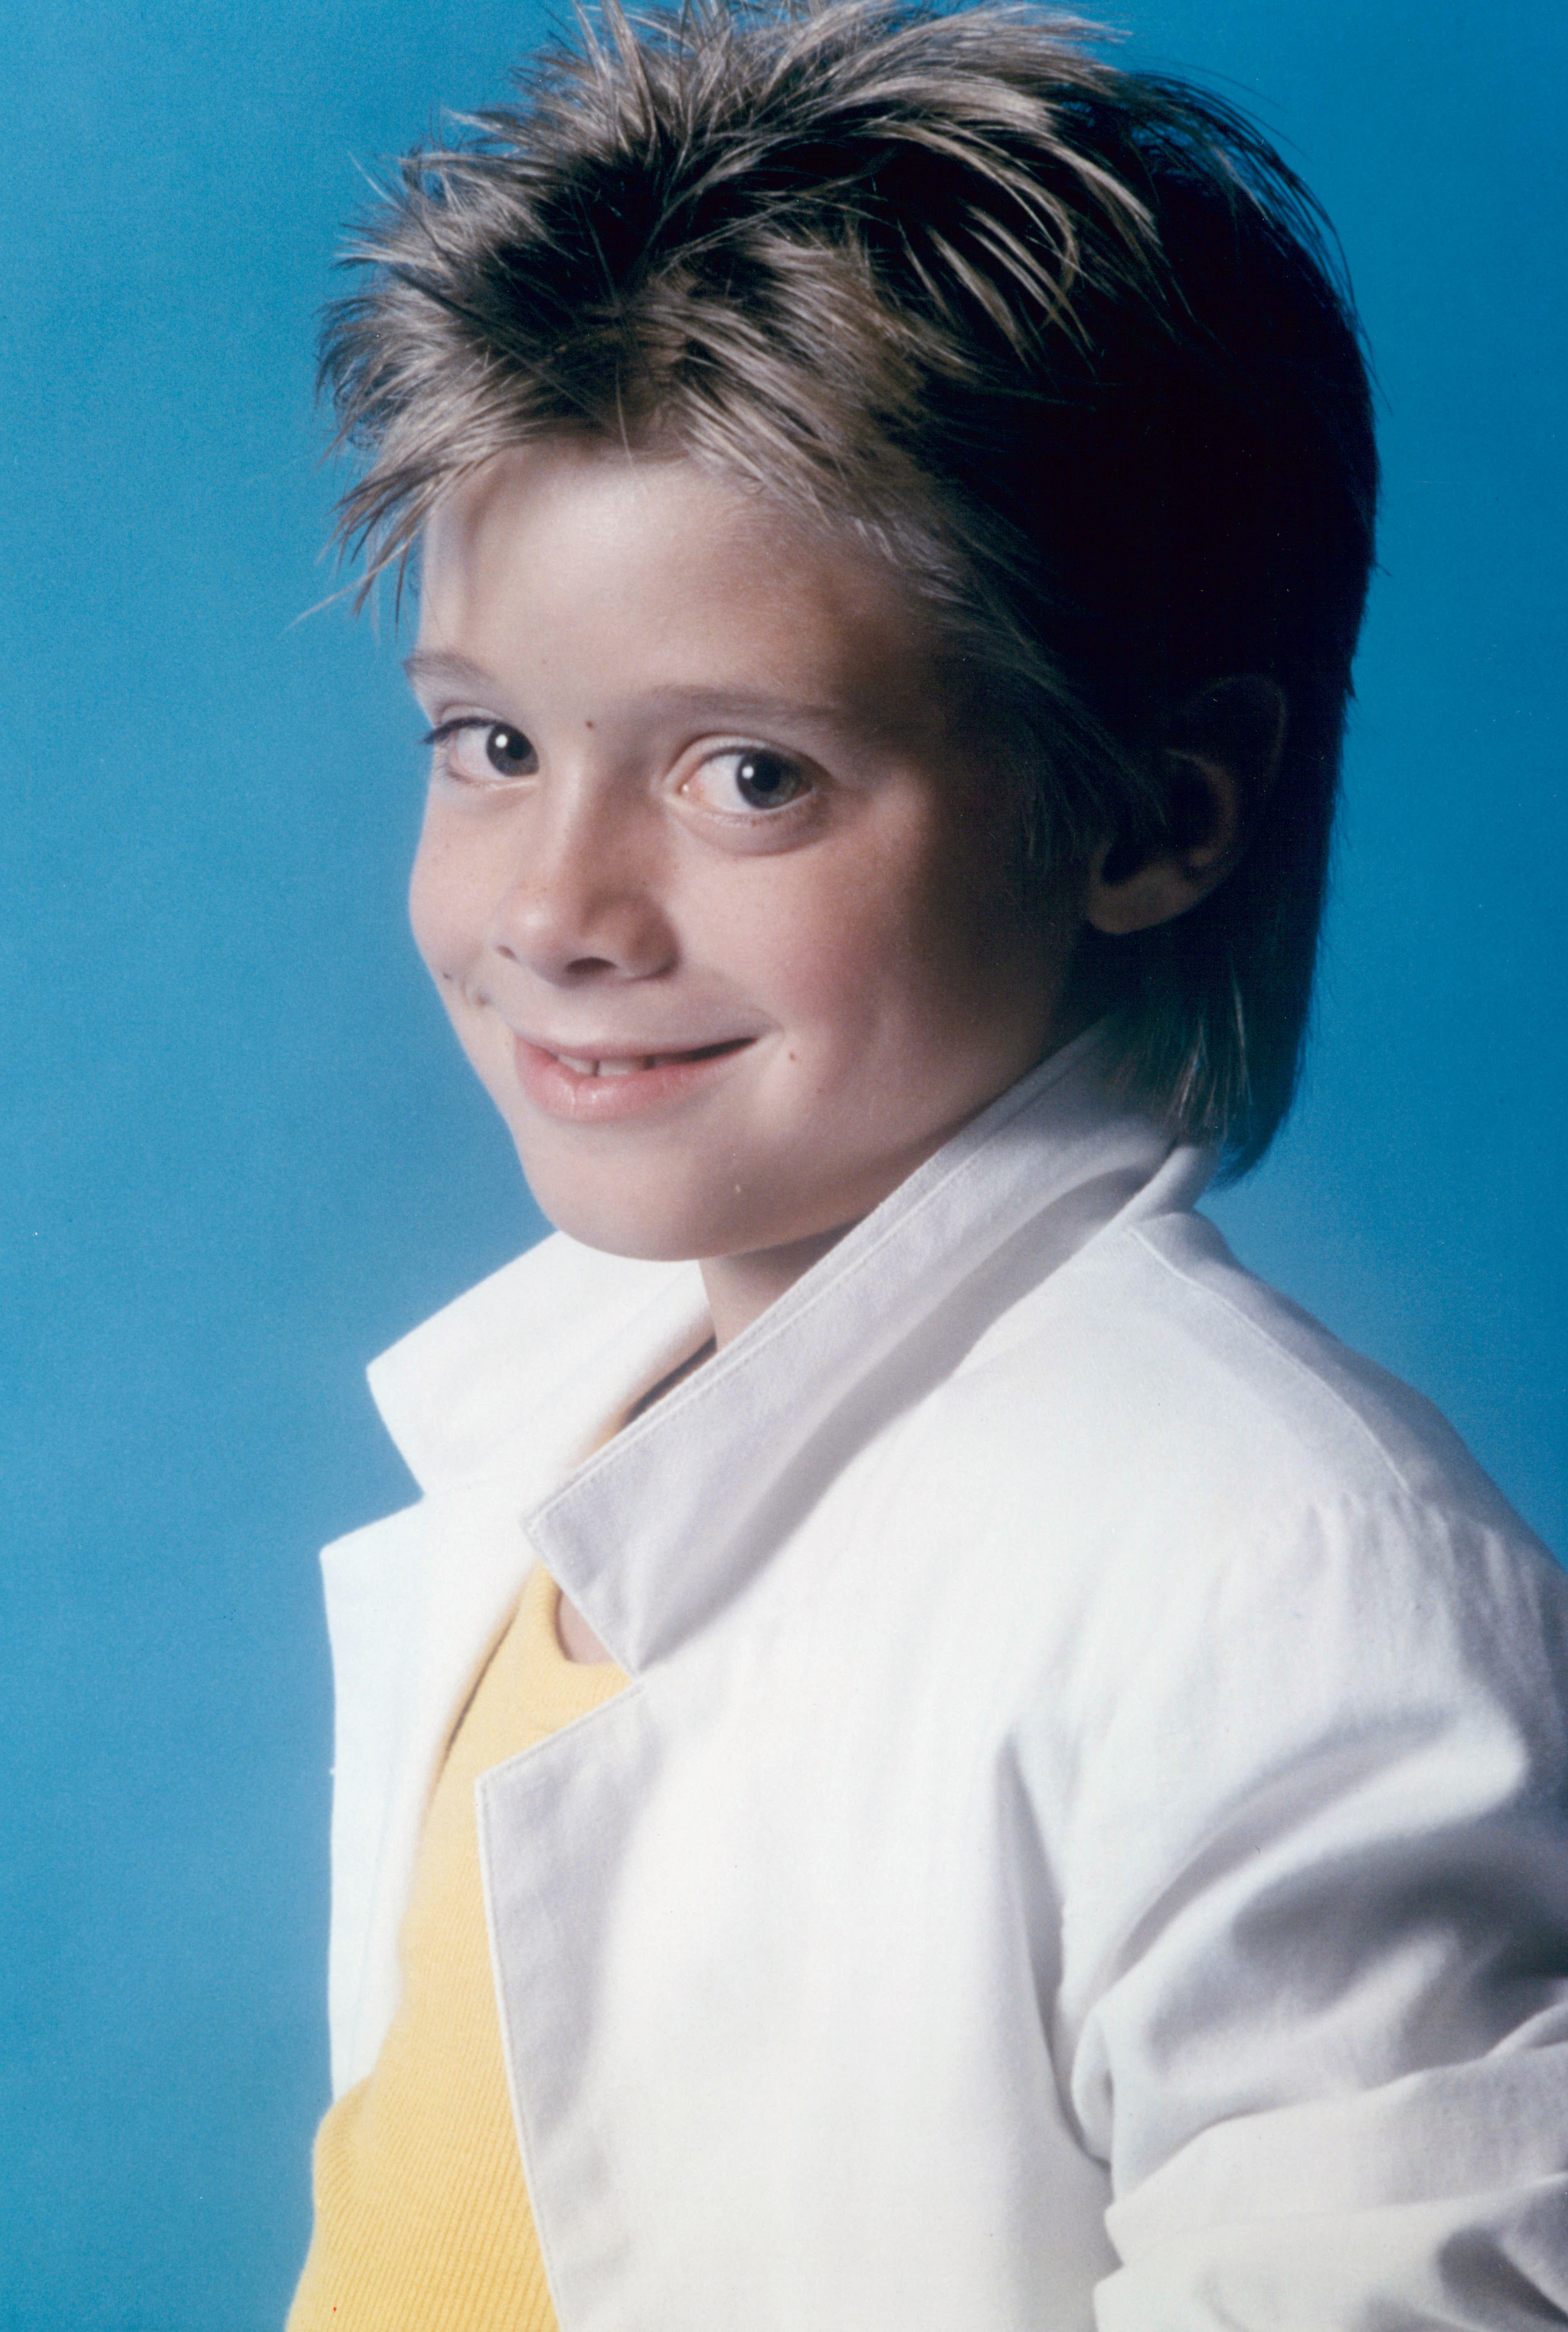 Danny Pintauro photographed in 1987 | Source: Getty Images